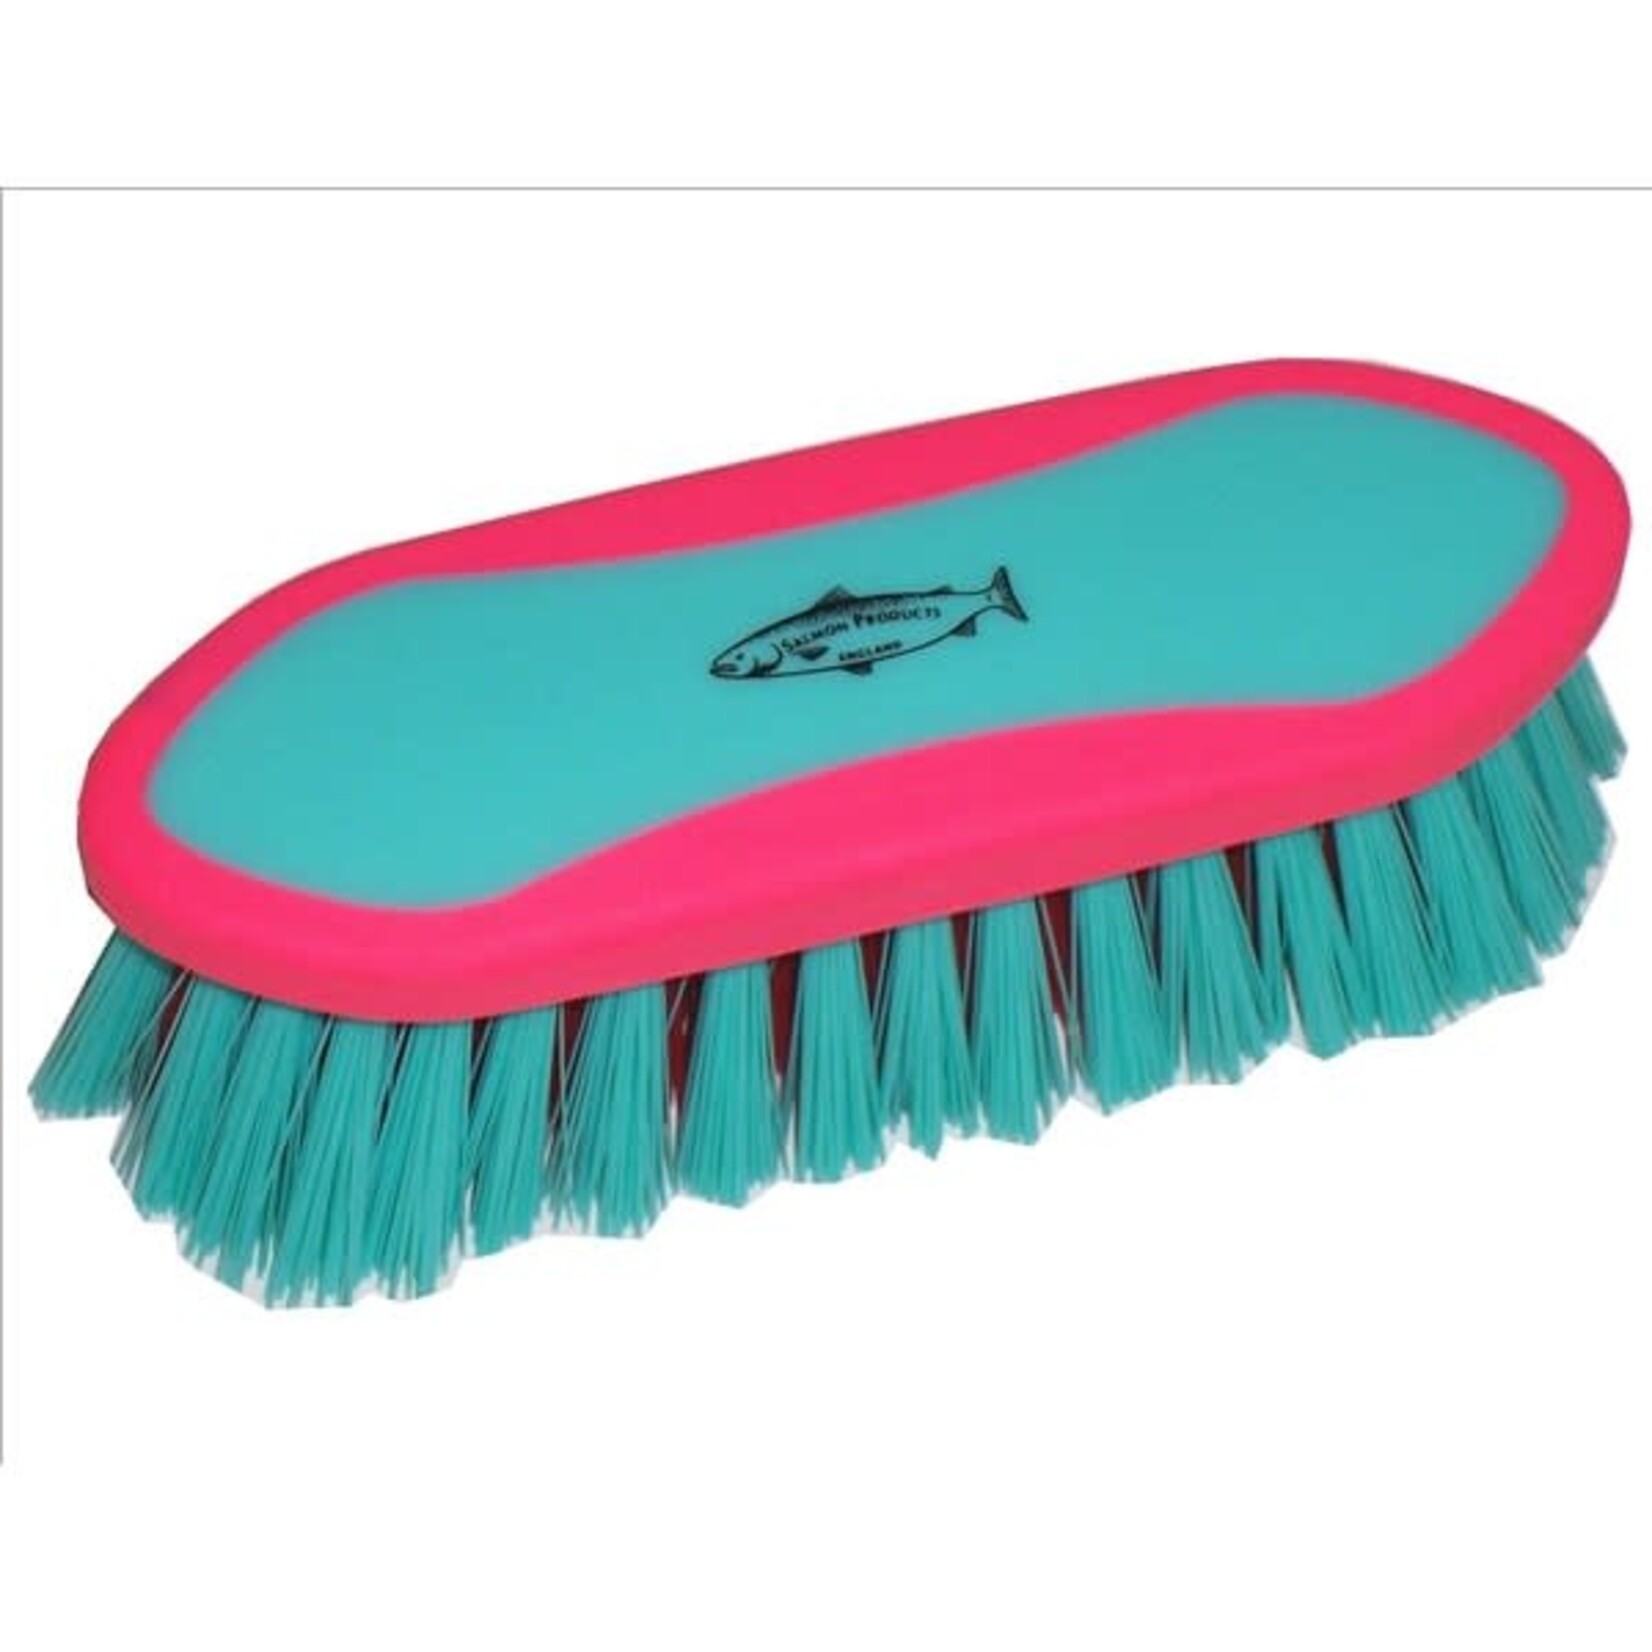 6.75" Grippee Dandy Brush - Assorted Colours